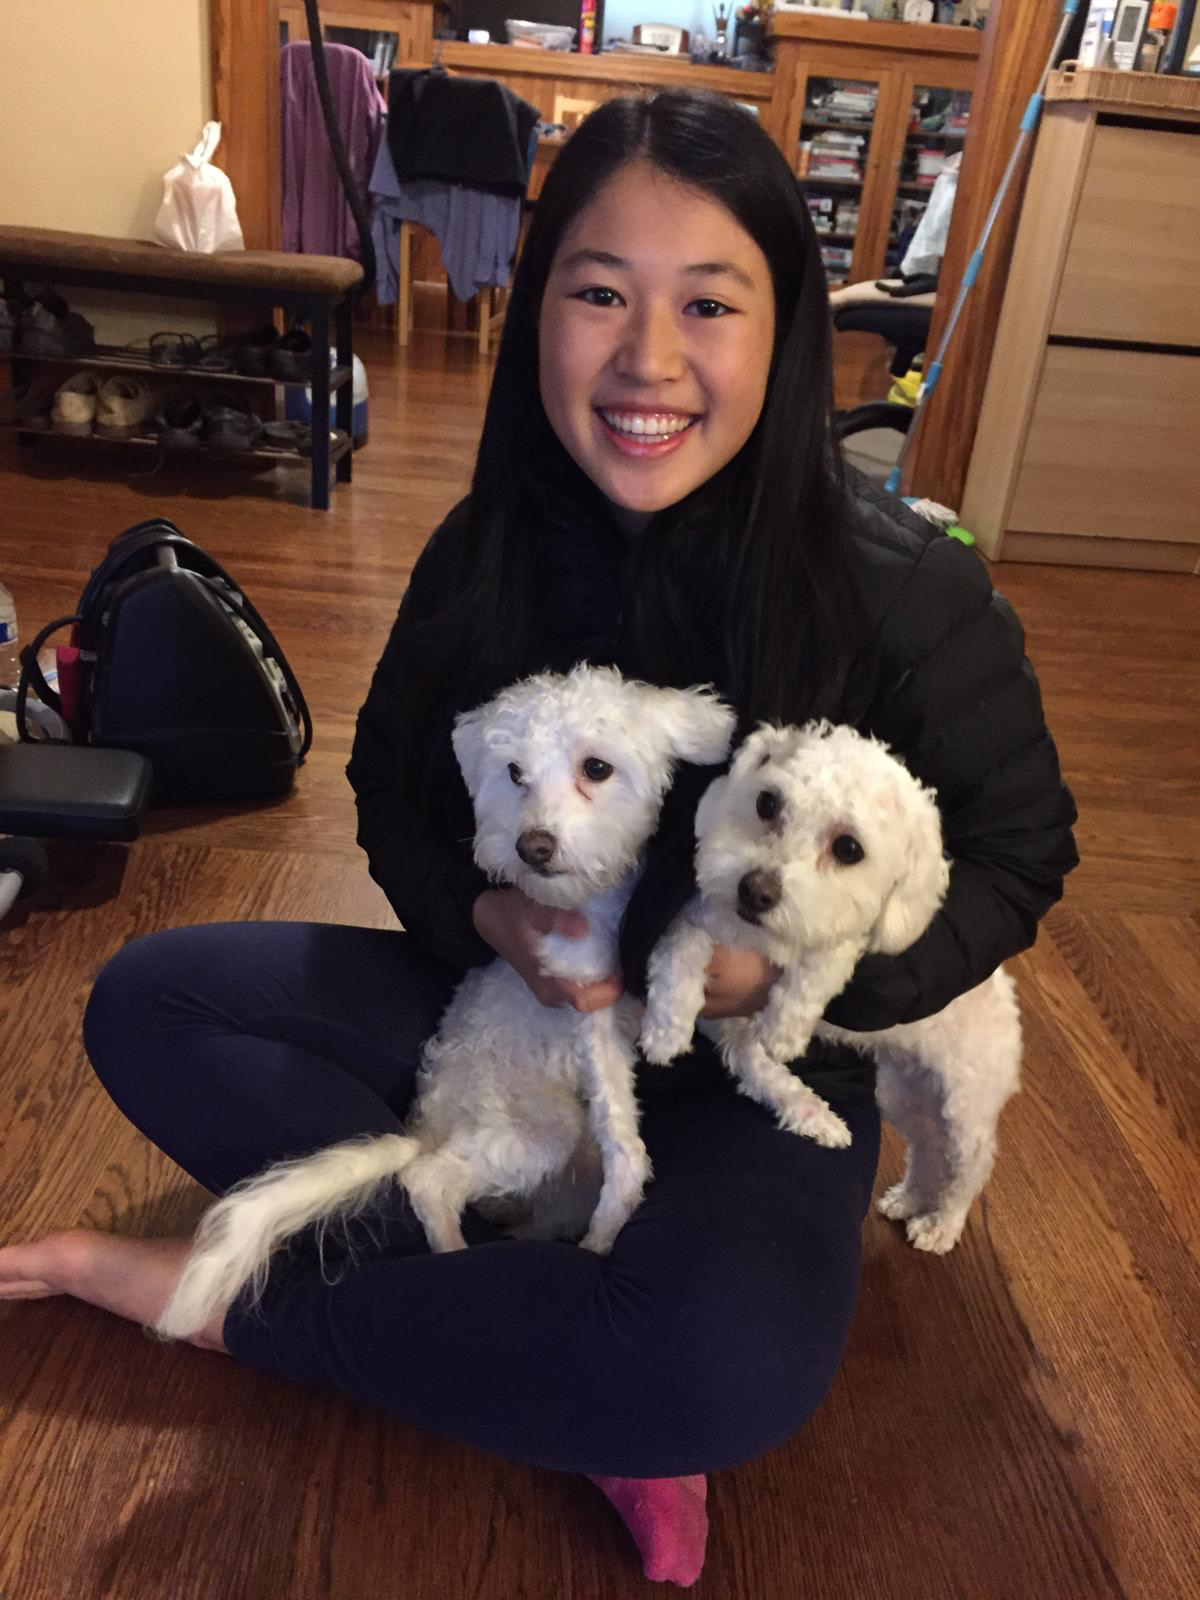 Kailee Lin holding two fluffy white dogs!